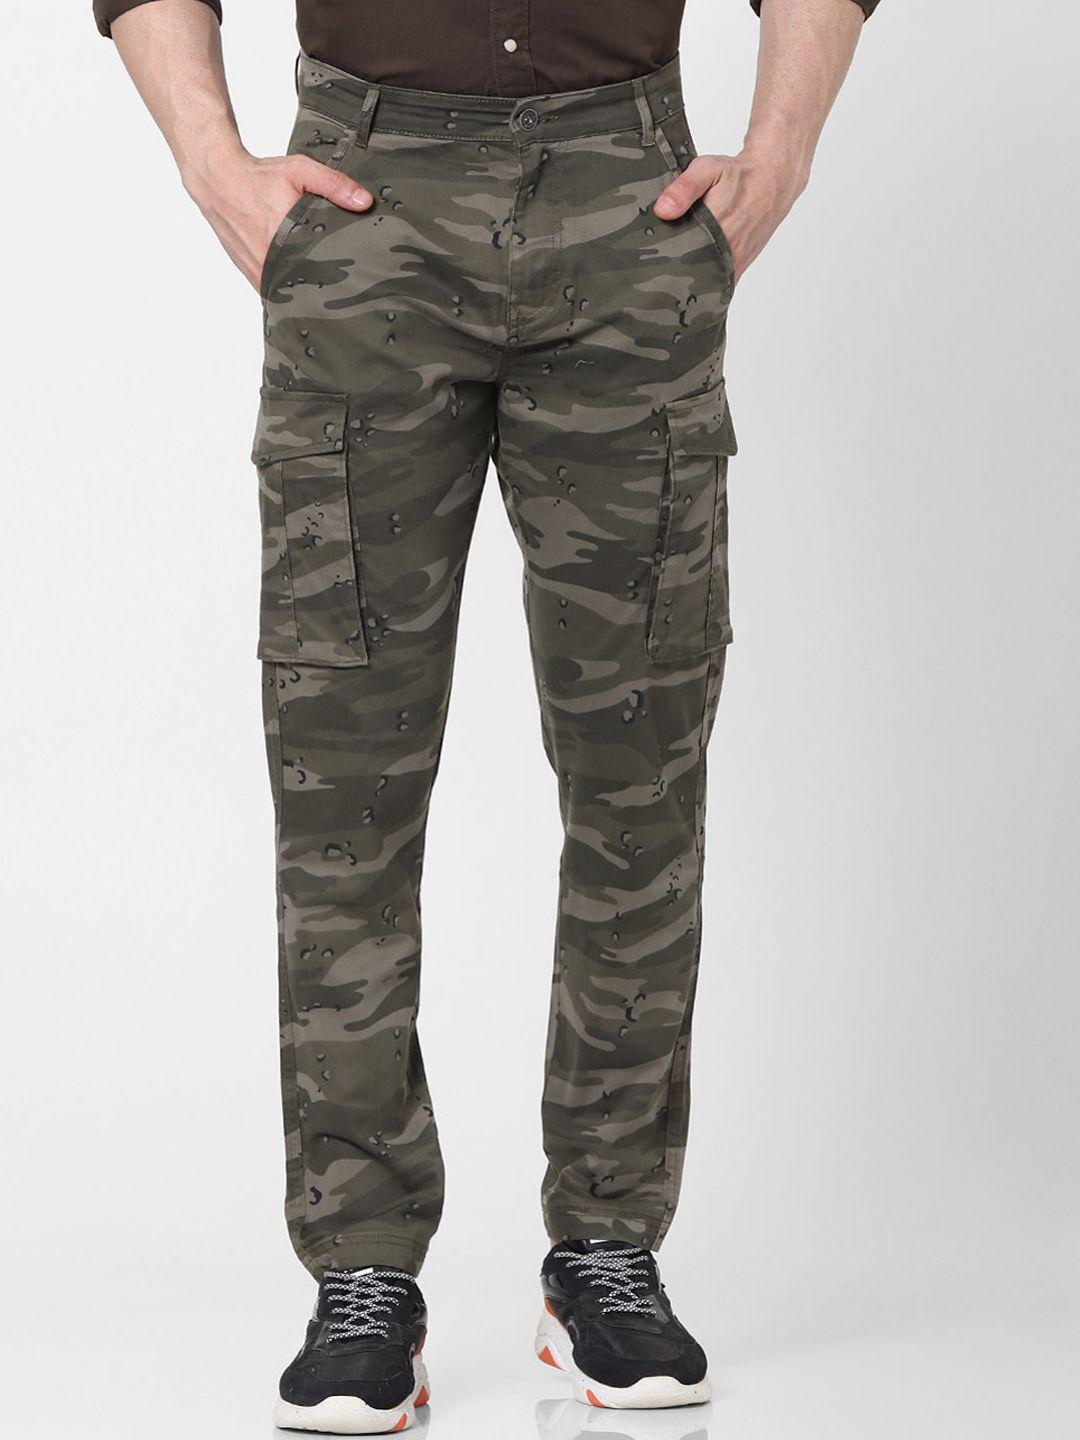 celio-men-olive-green-camouflage-printed-slim-fit-cargos-trousers